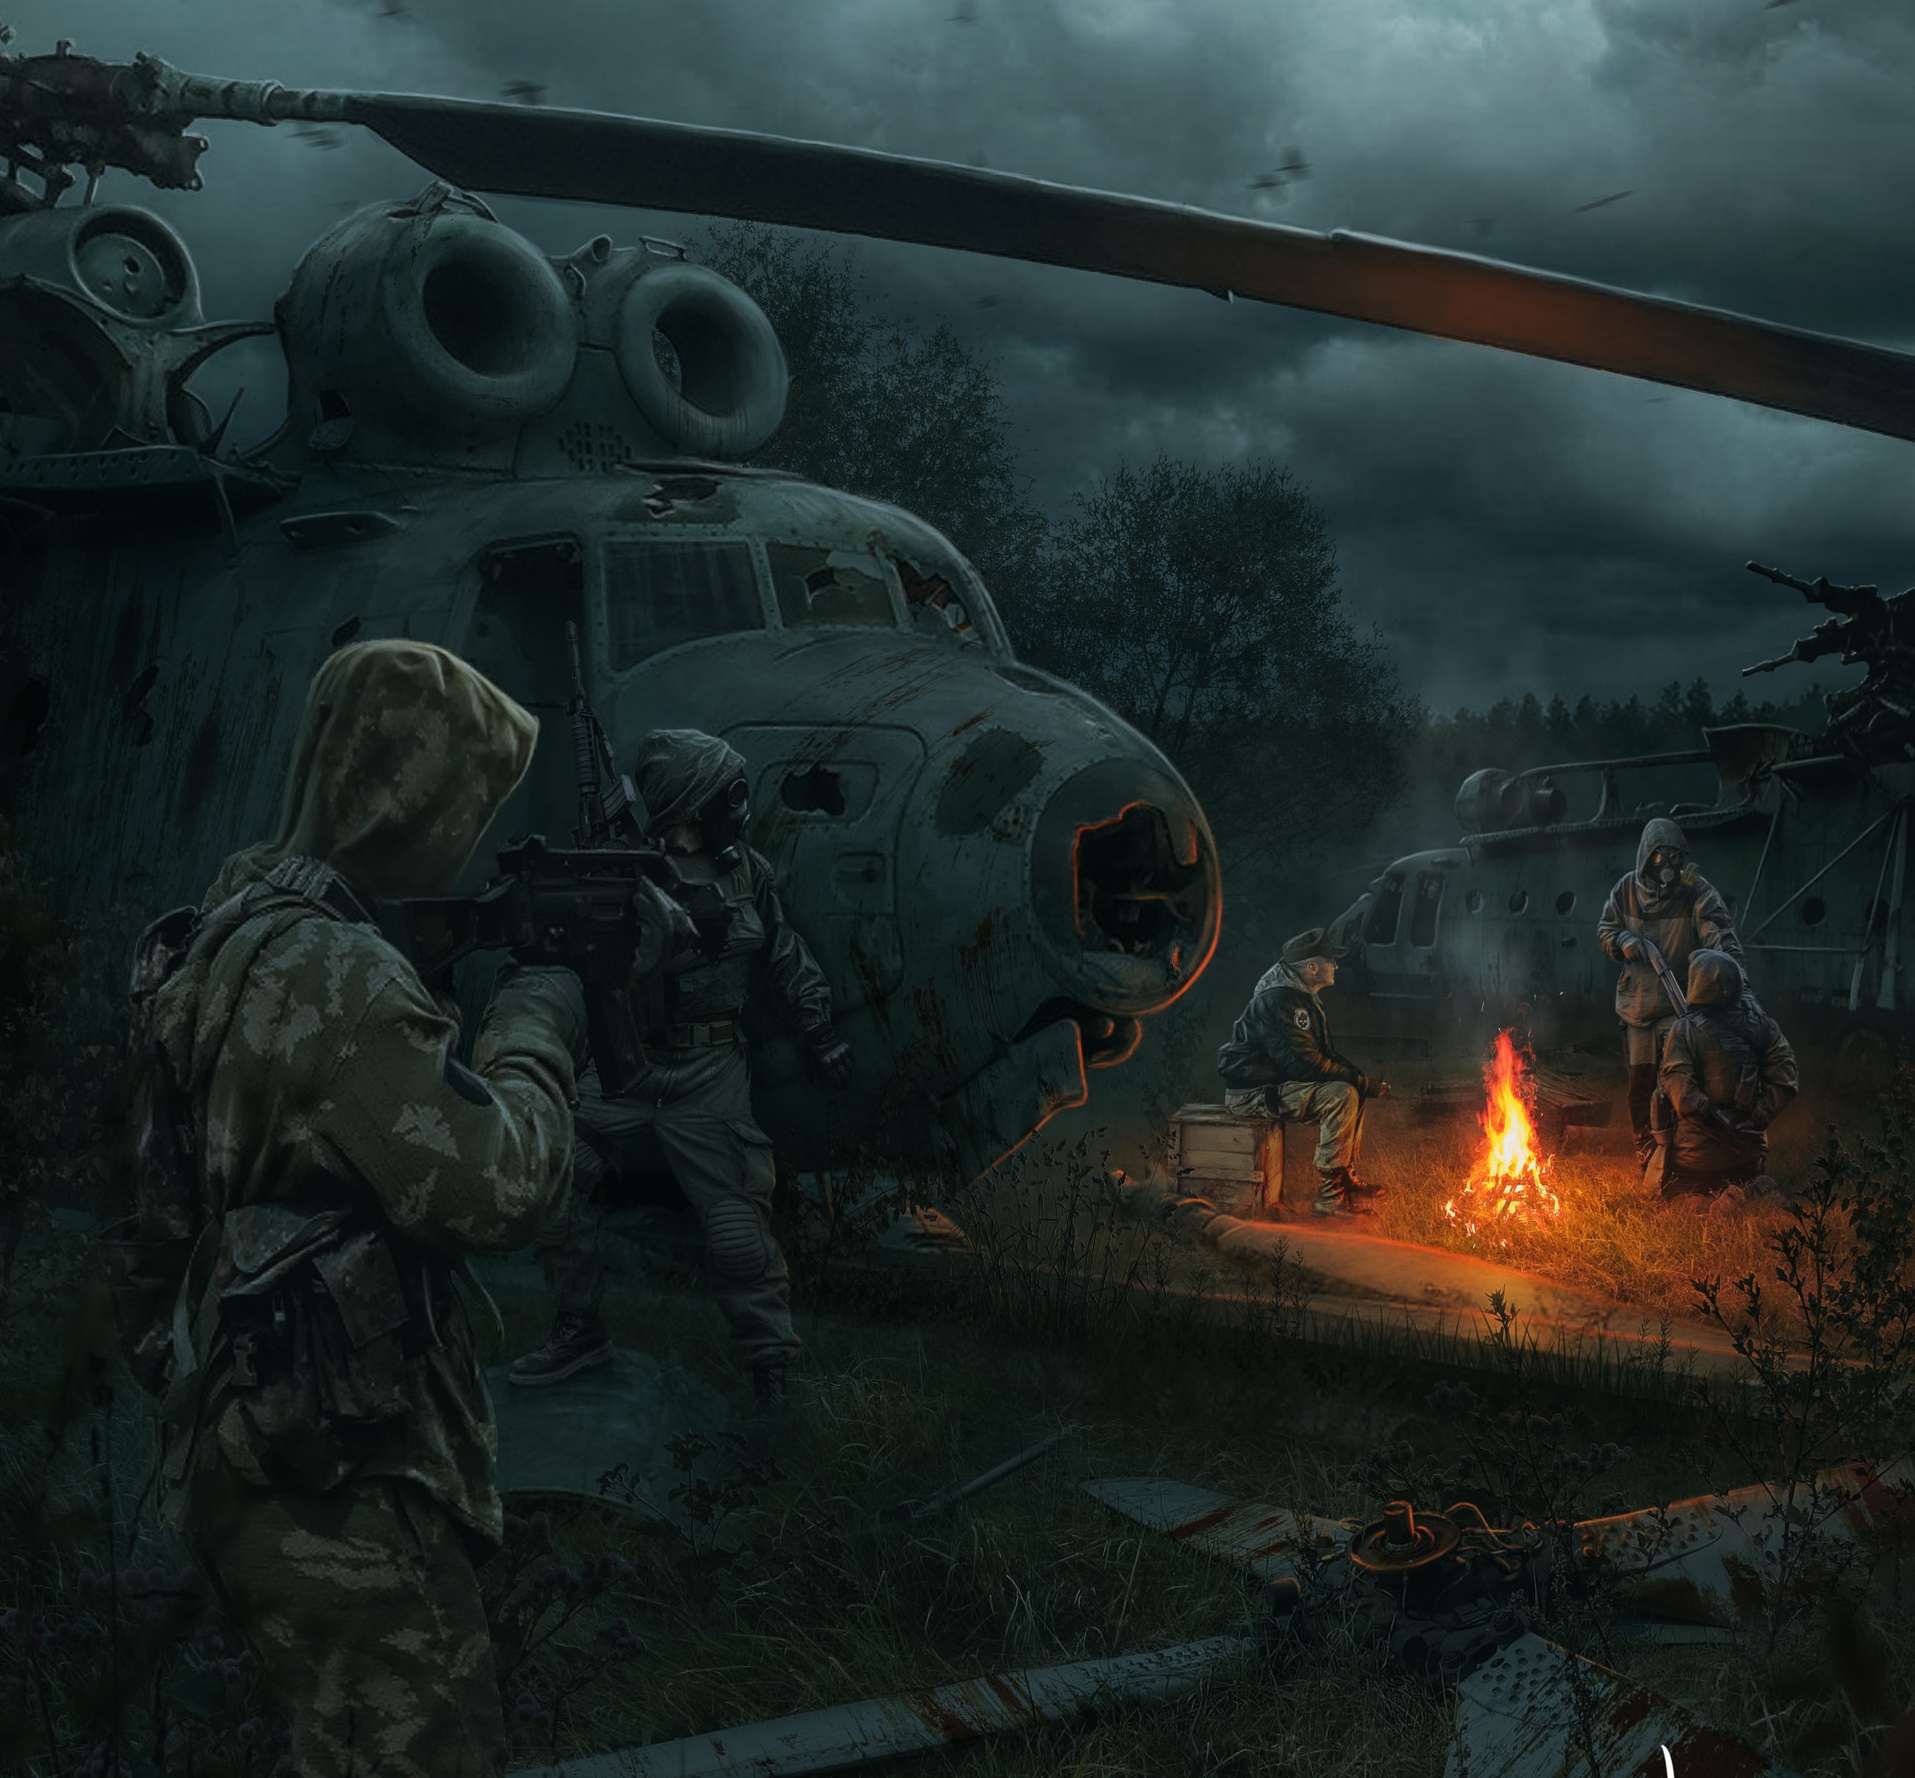 General 1915x1778 illustration S.T.A.L.K.E.R. fan art soldier science fiction video games shooting weapon helicopters apocalyptic